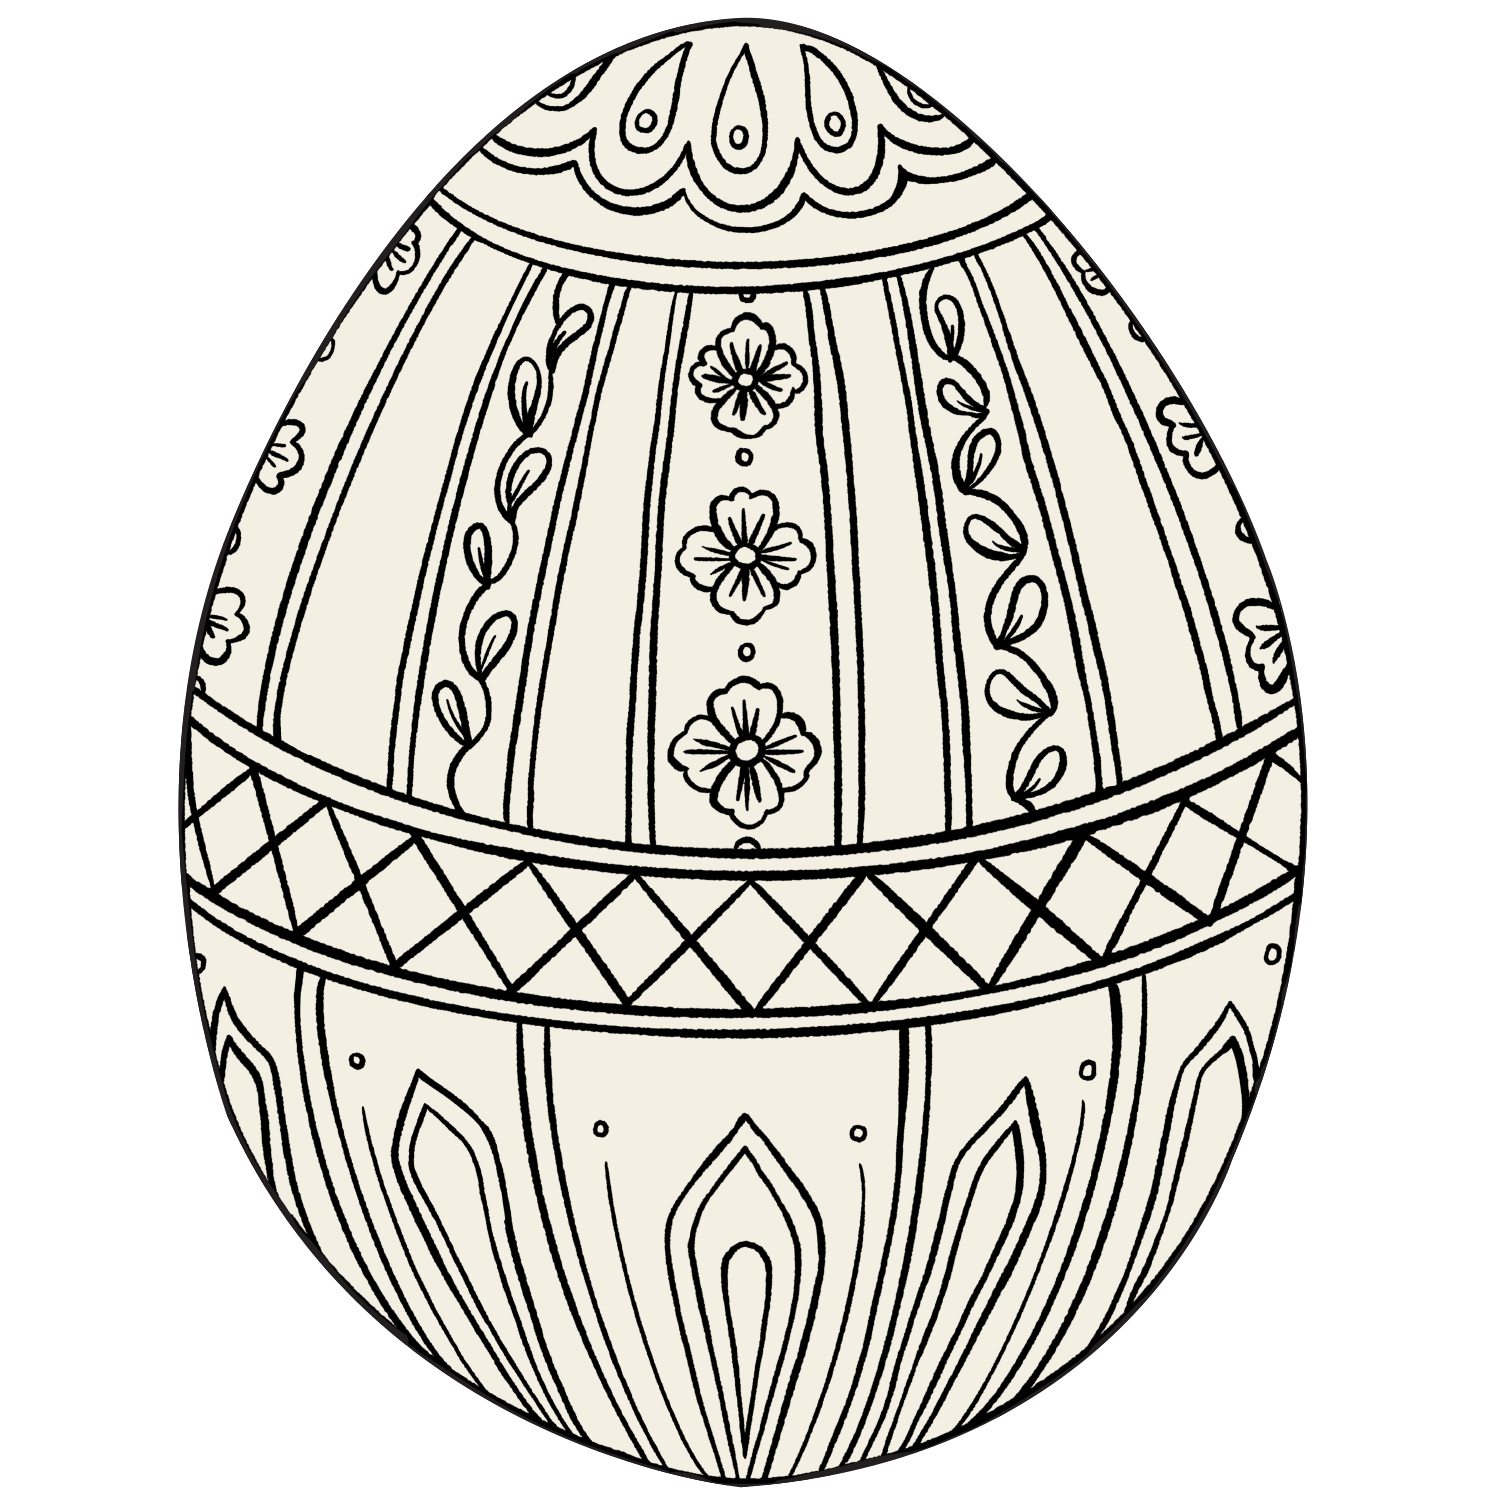 A coloring-book style line drawing of an ornate Easter egg.